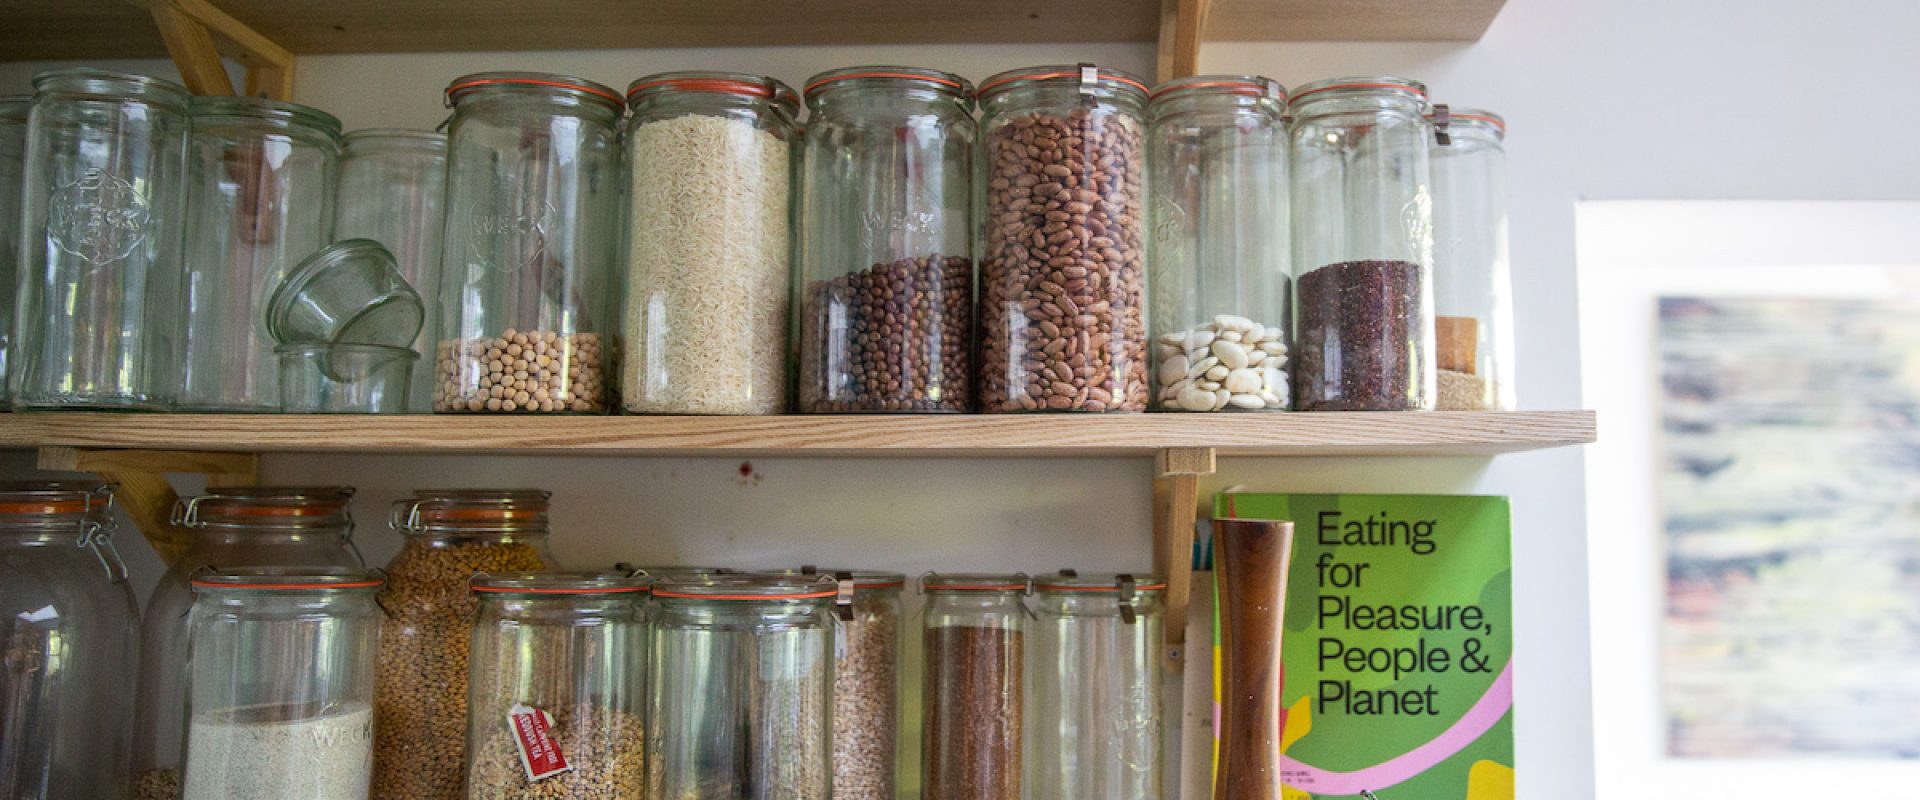 Bulk buying from co-ops, zero waste living, whole foods in jars